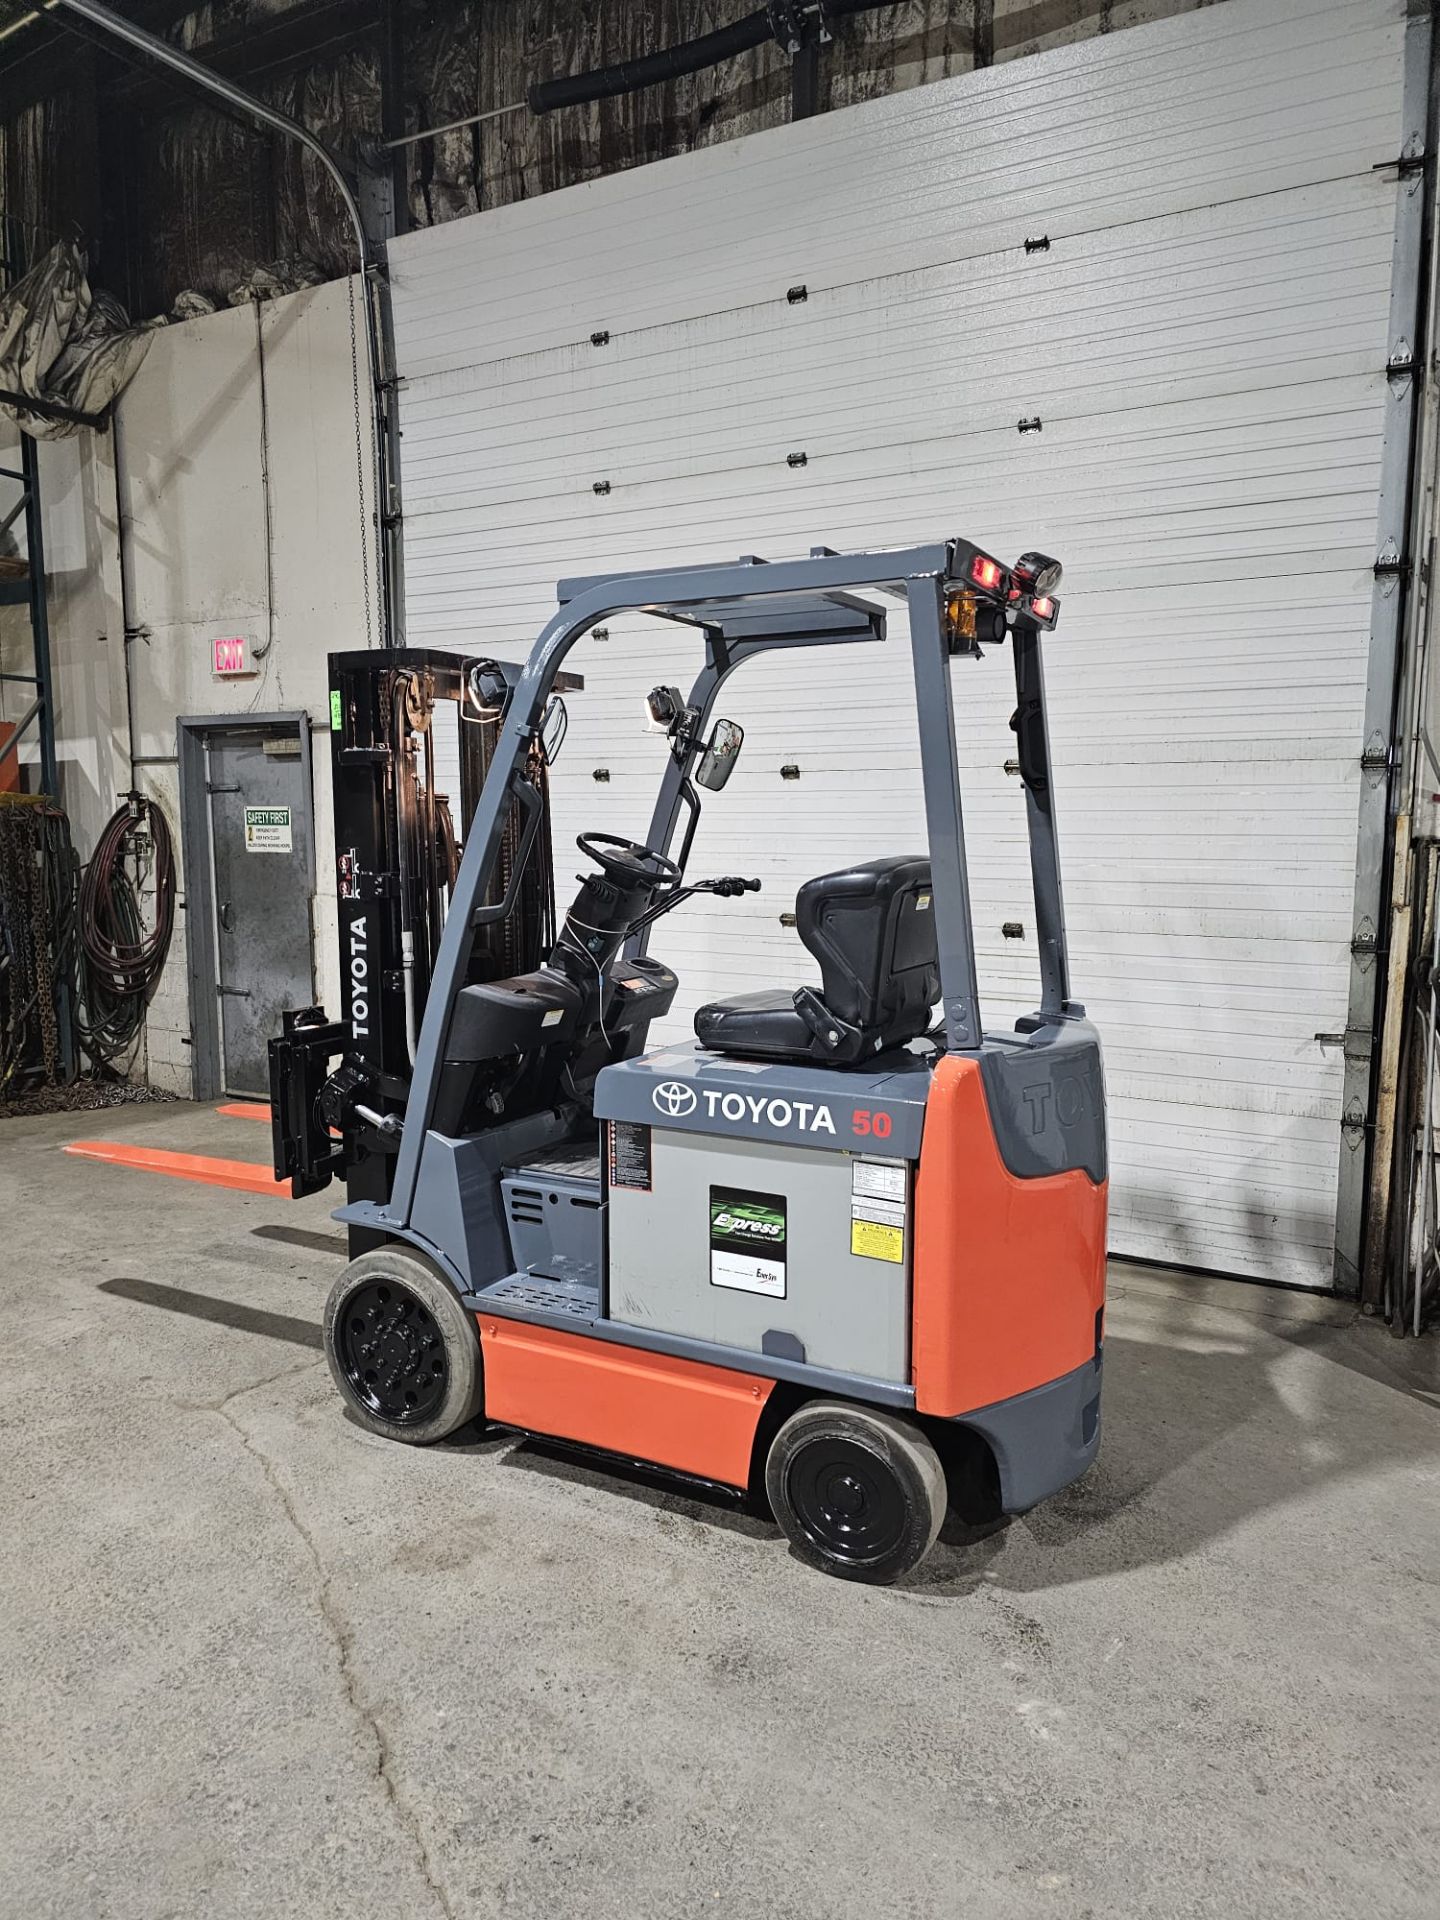 2012 TOYOTA 5,000lbs Capacity Forklift Electric 48V with sideshift with 3-STAGE MAST - FREE CUSTOMS - Image 2 of 6